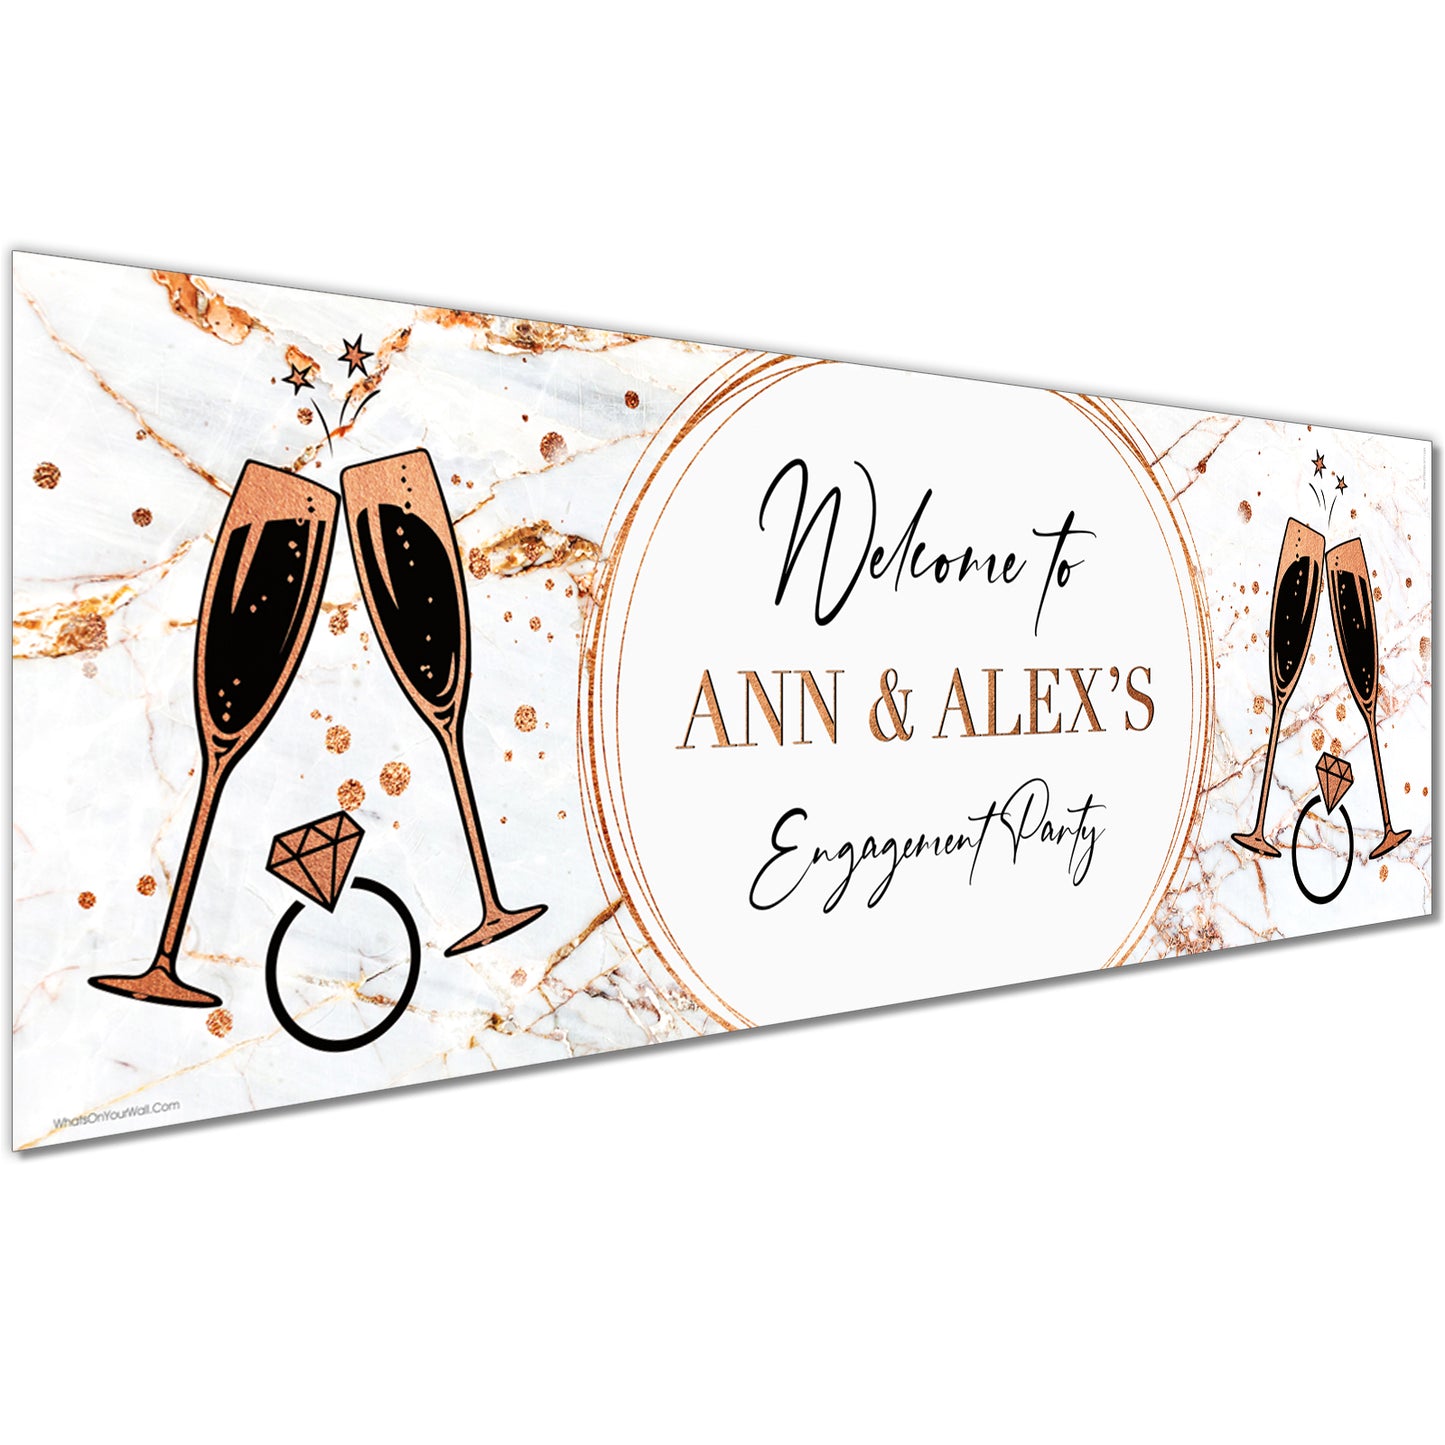 Personalised Engagement Banners in White Gold Design